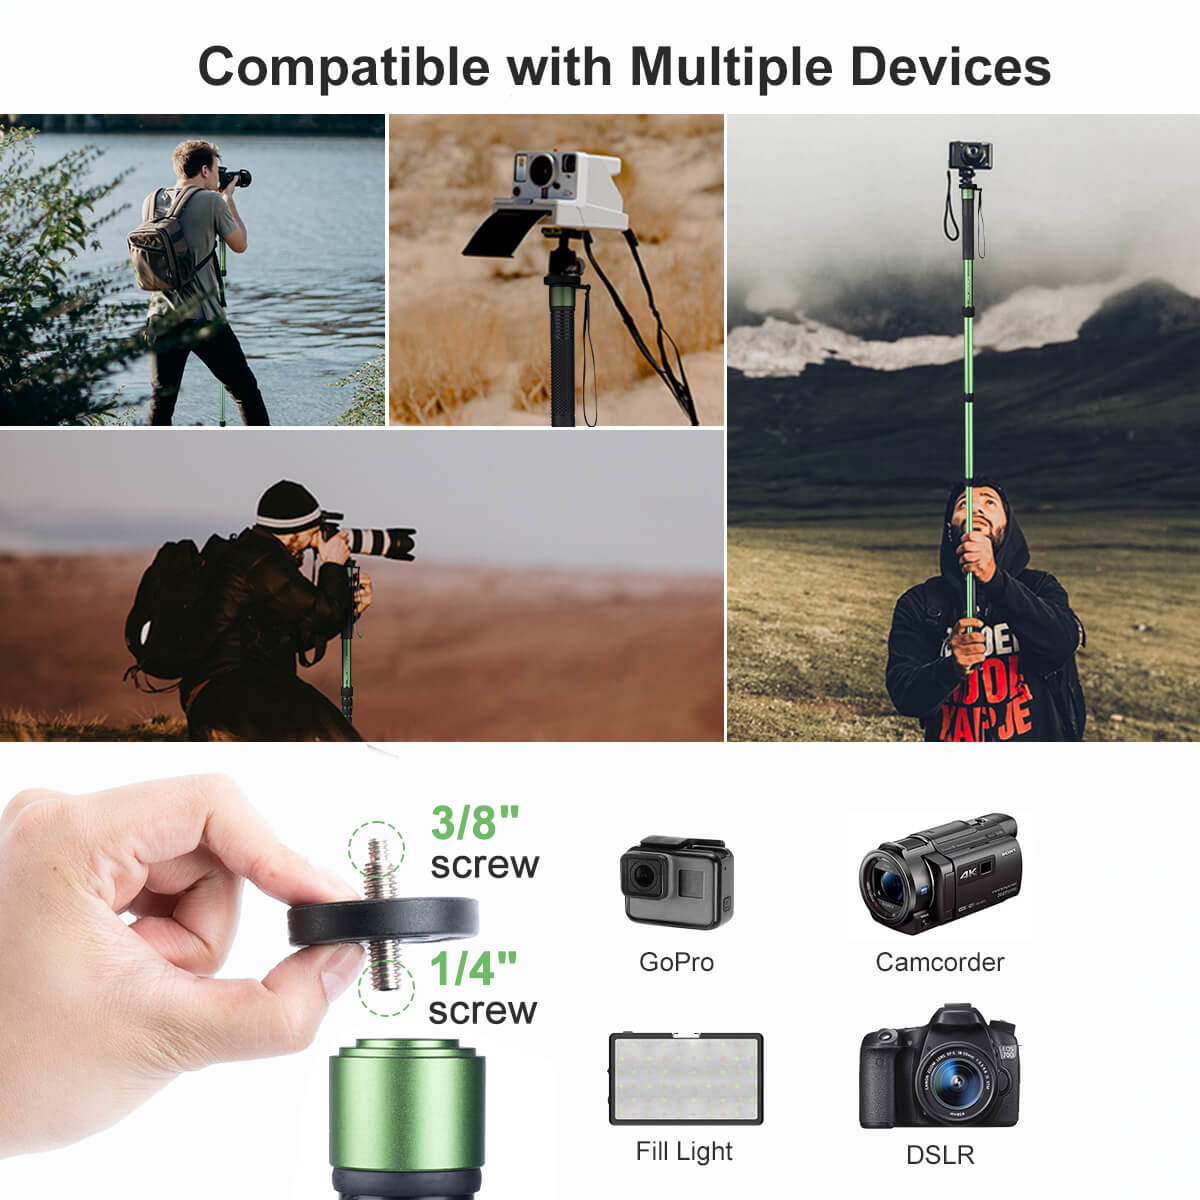 Monopod tripod stand Moman MA66 can be utilized with multiple devices, such as digital camera, instax, GoPro, fill light, camcorder, etc.